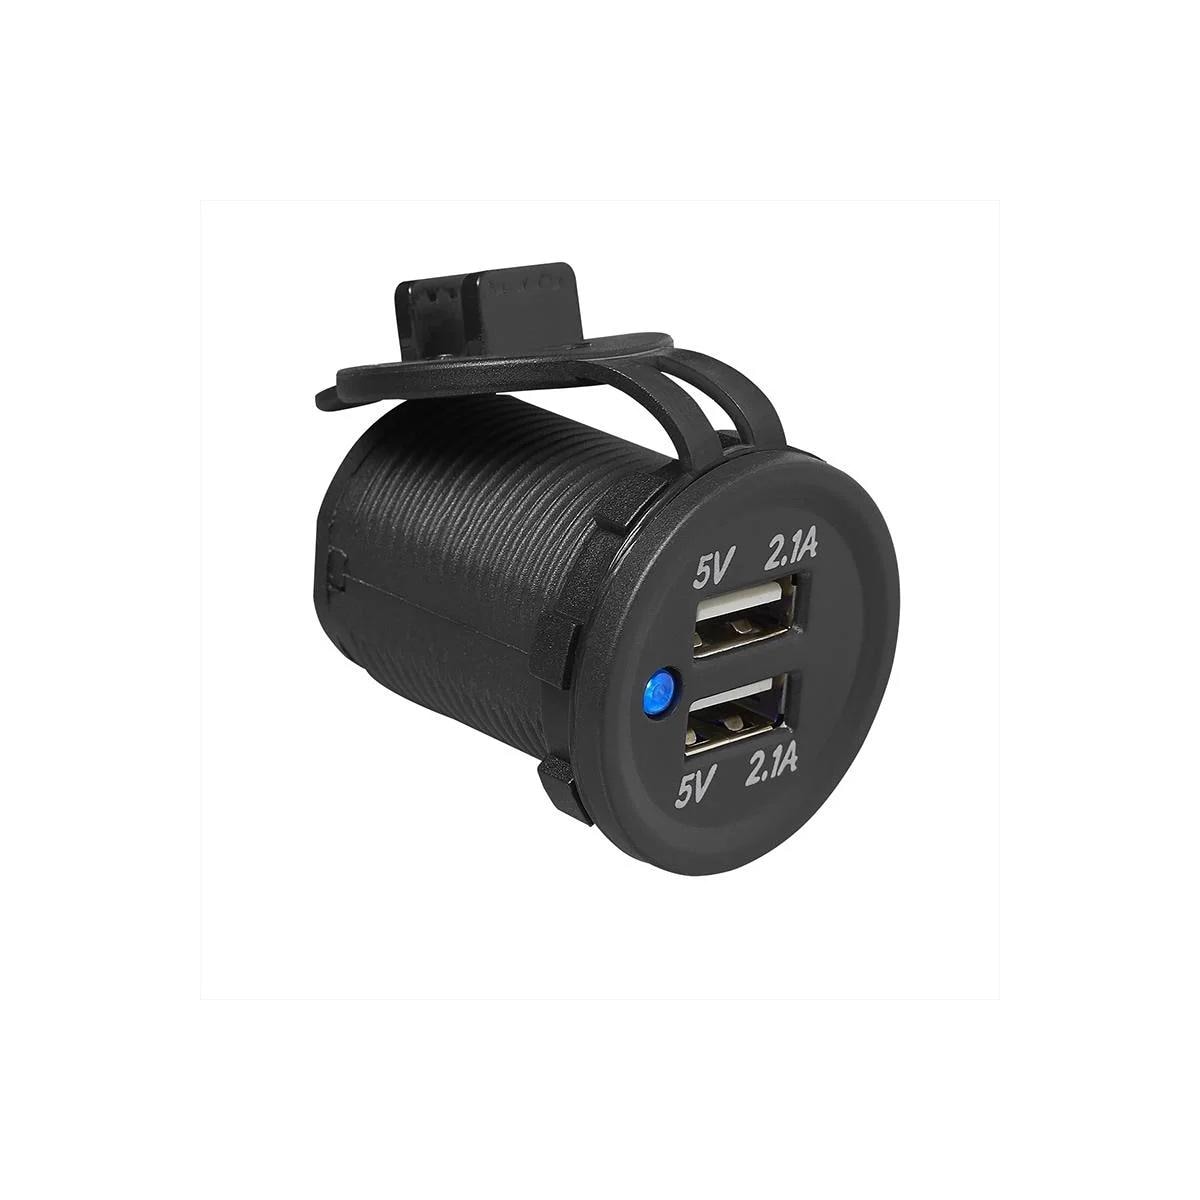 Pro Plus Power USB-Steckdose, mit Blister, 2x2100mA bei Camping Wagner  Campingzubehör